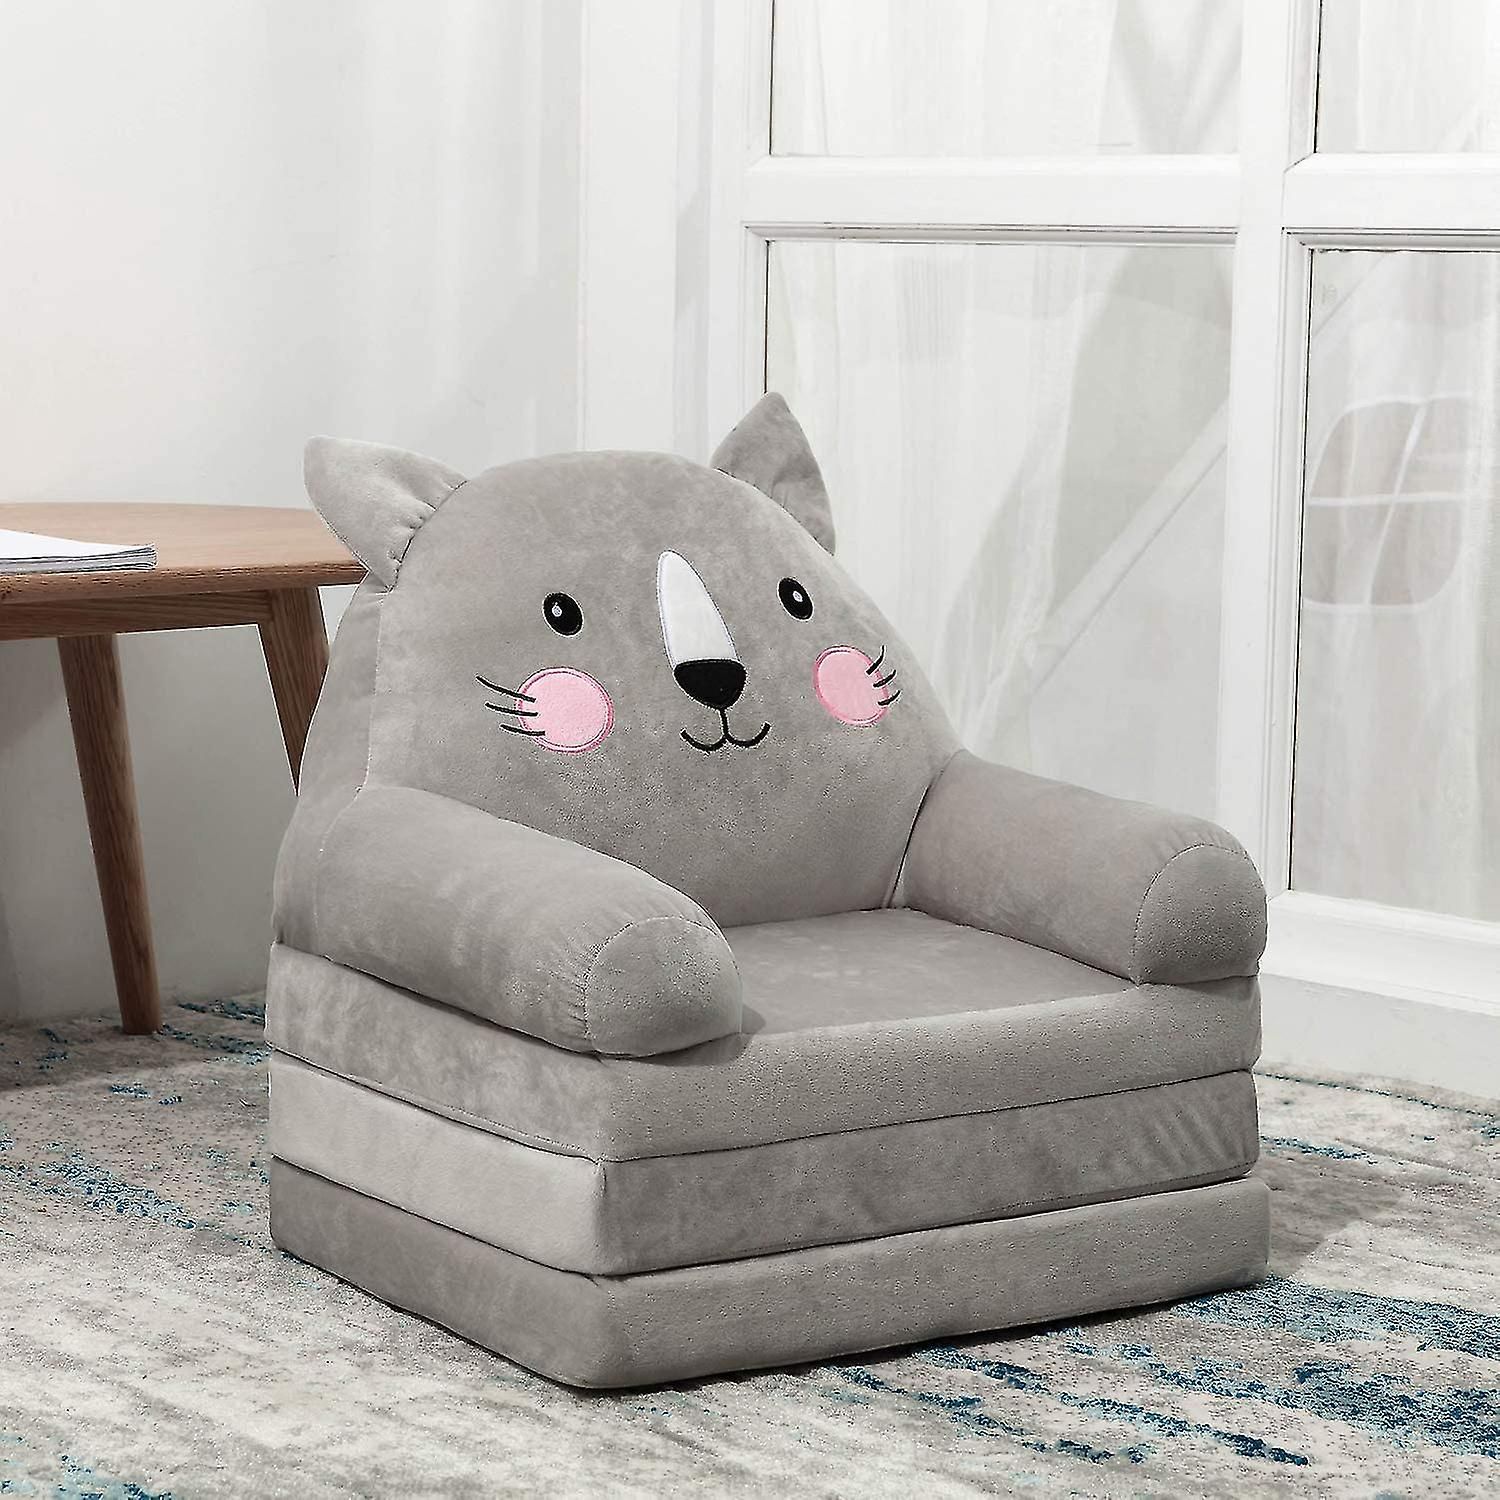 Cartoon Foldable Kids Sofa, Plush Cat Shape Children Couch Backrest Armchair  Bed With Pocket, Upholstered 2 In 1 Flip Open Couch | Fruugo Fr Regarding 2 In 1 Foldable Children's Sofa Beds (Photo 1 of 15)